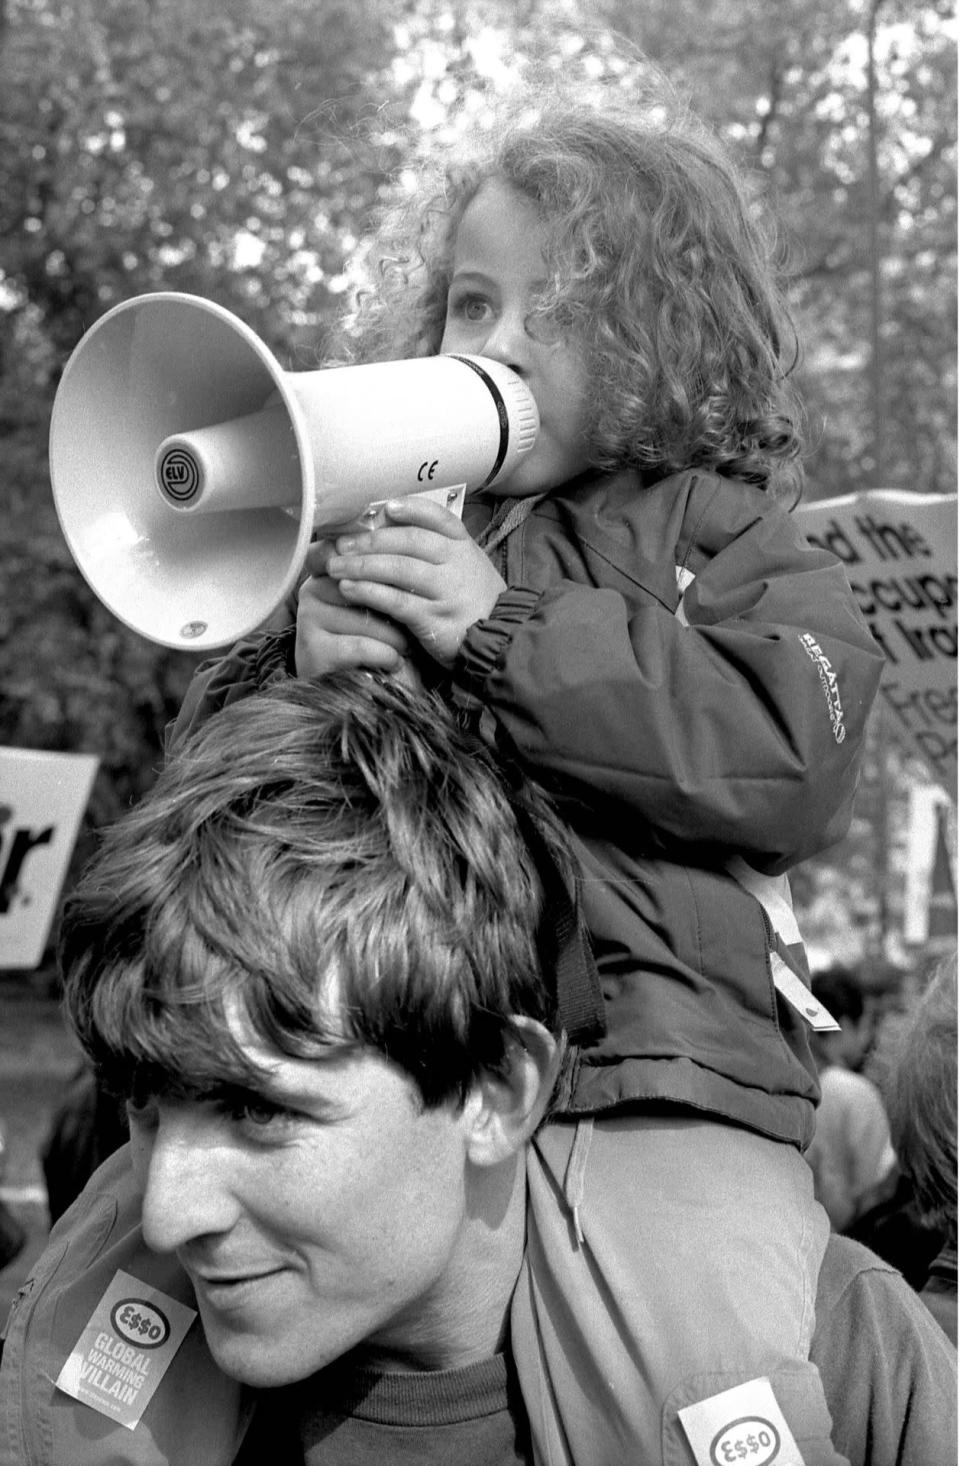 Loud and proud: A little boy perched on top of his father’s shoulders pleading for the prevention of an impending war on Iraq